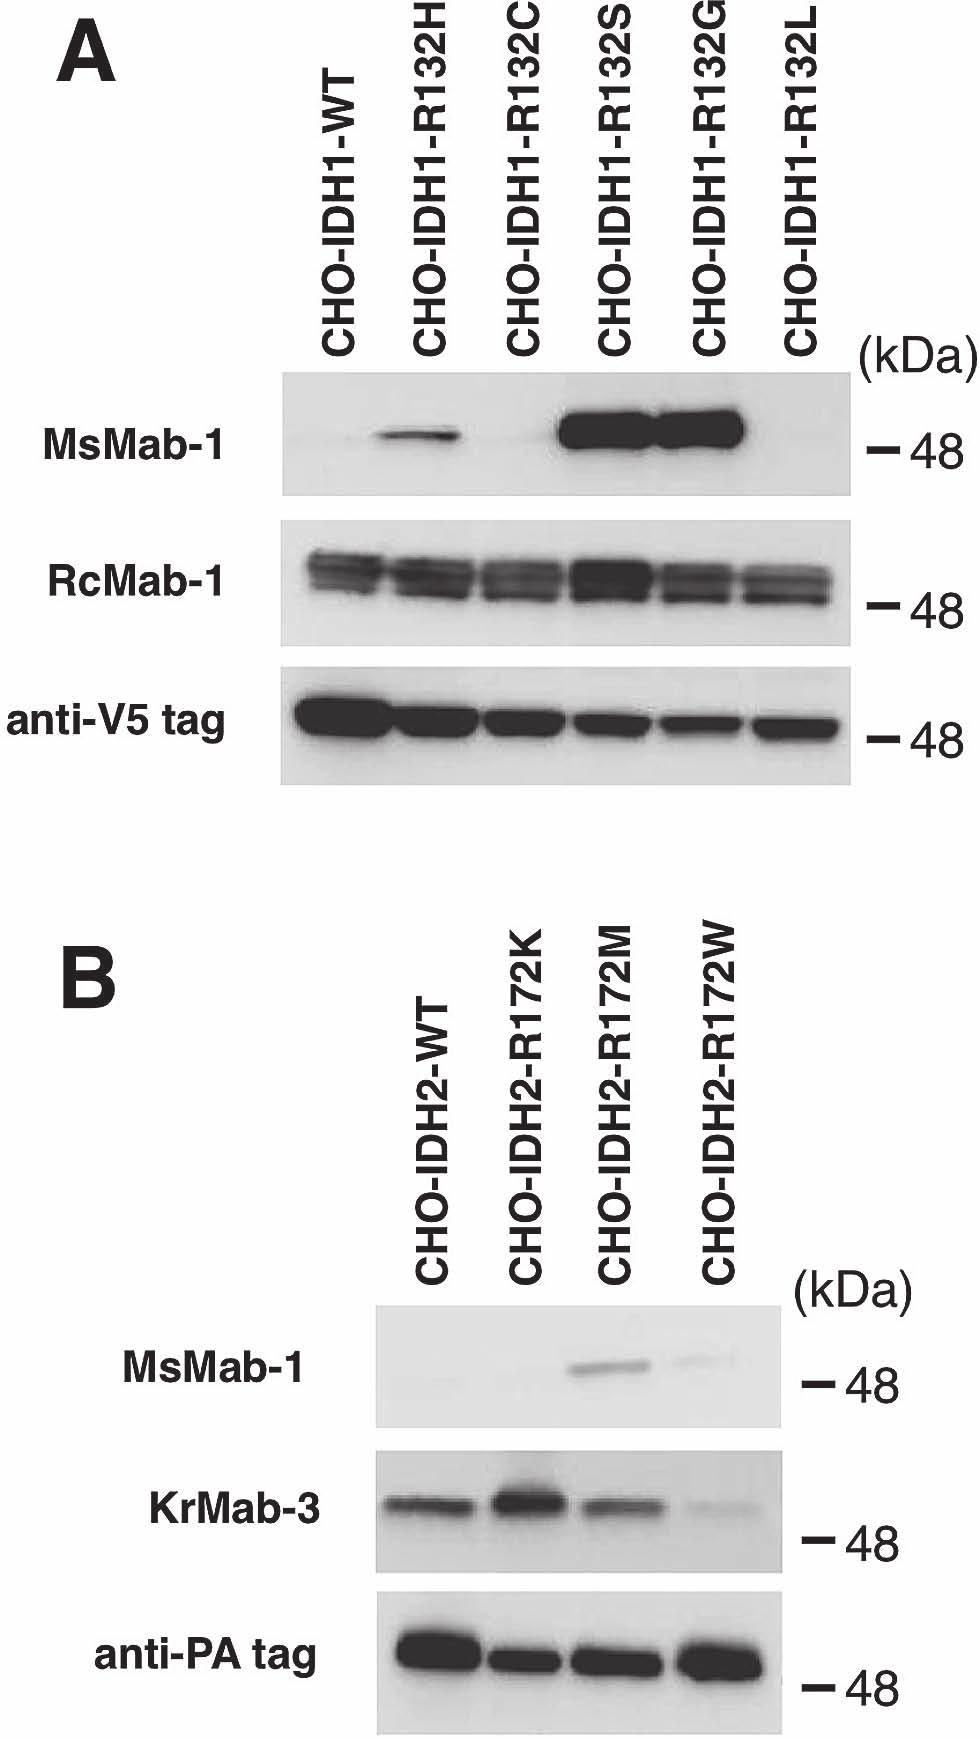 Multi-Specific mab Against IDH1/2 Mutations 107 Fig. 2. Western blot analyses by MsMab-1 against mutated IDH1/2-expressing CHO cells.